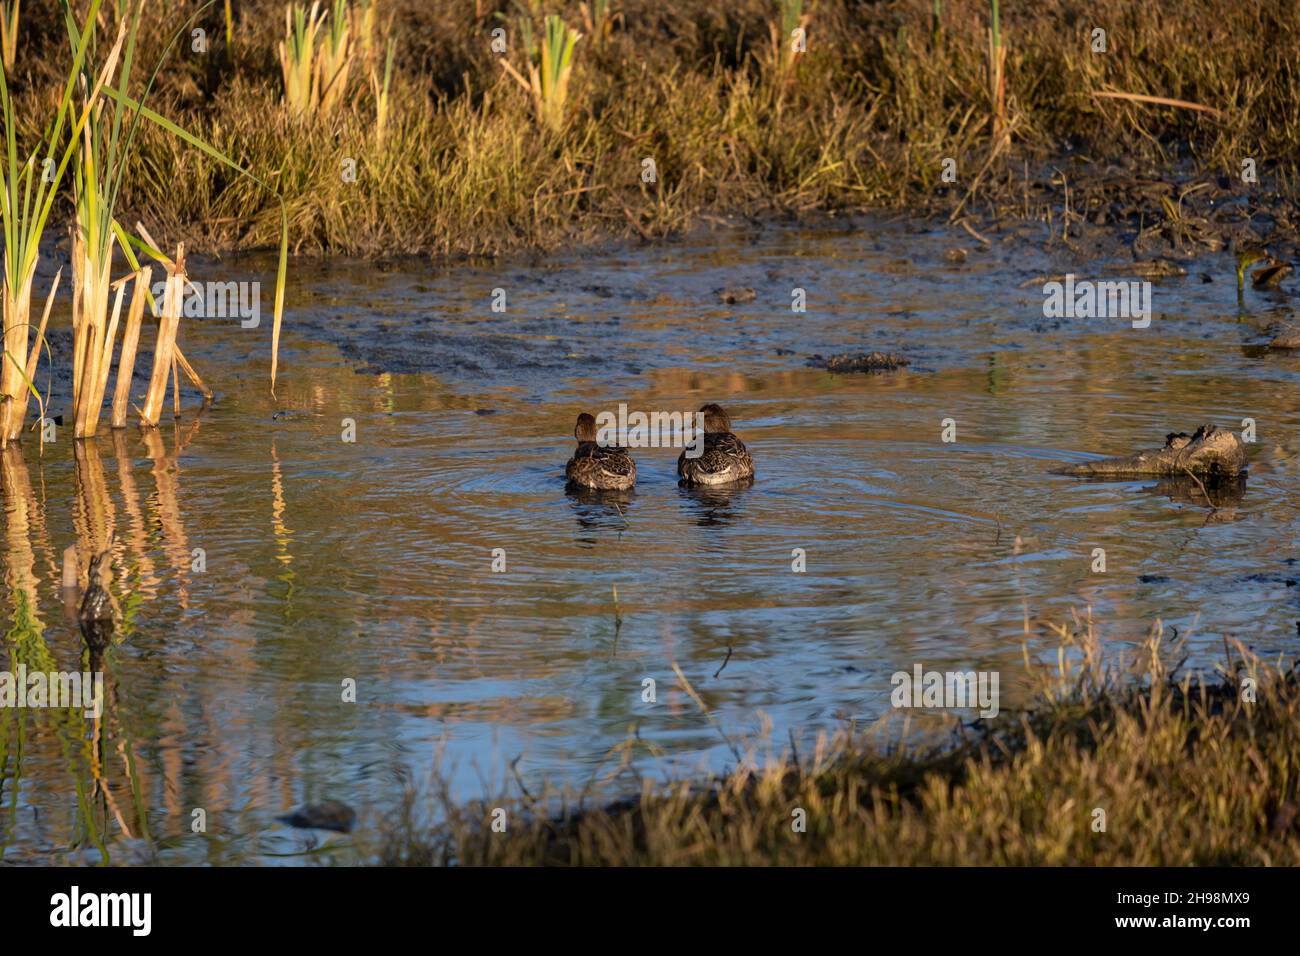 Ducks swimming in a water pond at the Gazelle Valley described as Israel’s first urban nature reserve named for a herd of gazelles of the subspecies Gazella that live in this area located in the heart of Jerusalem, Israel, Stock Photo